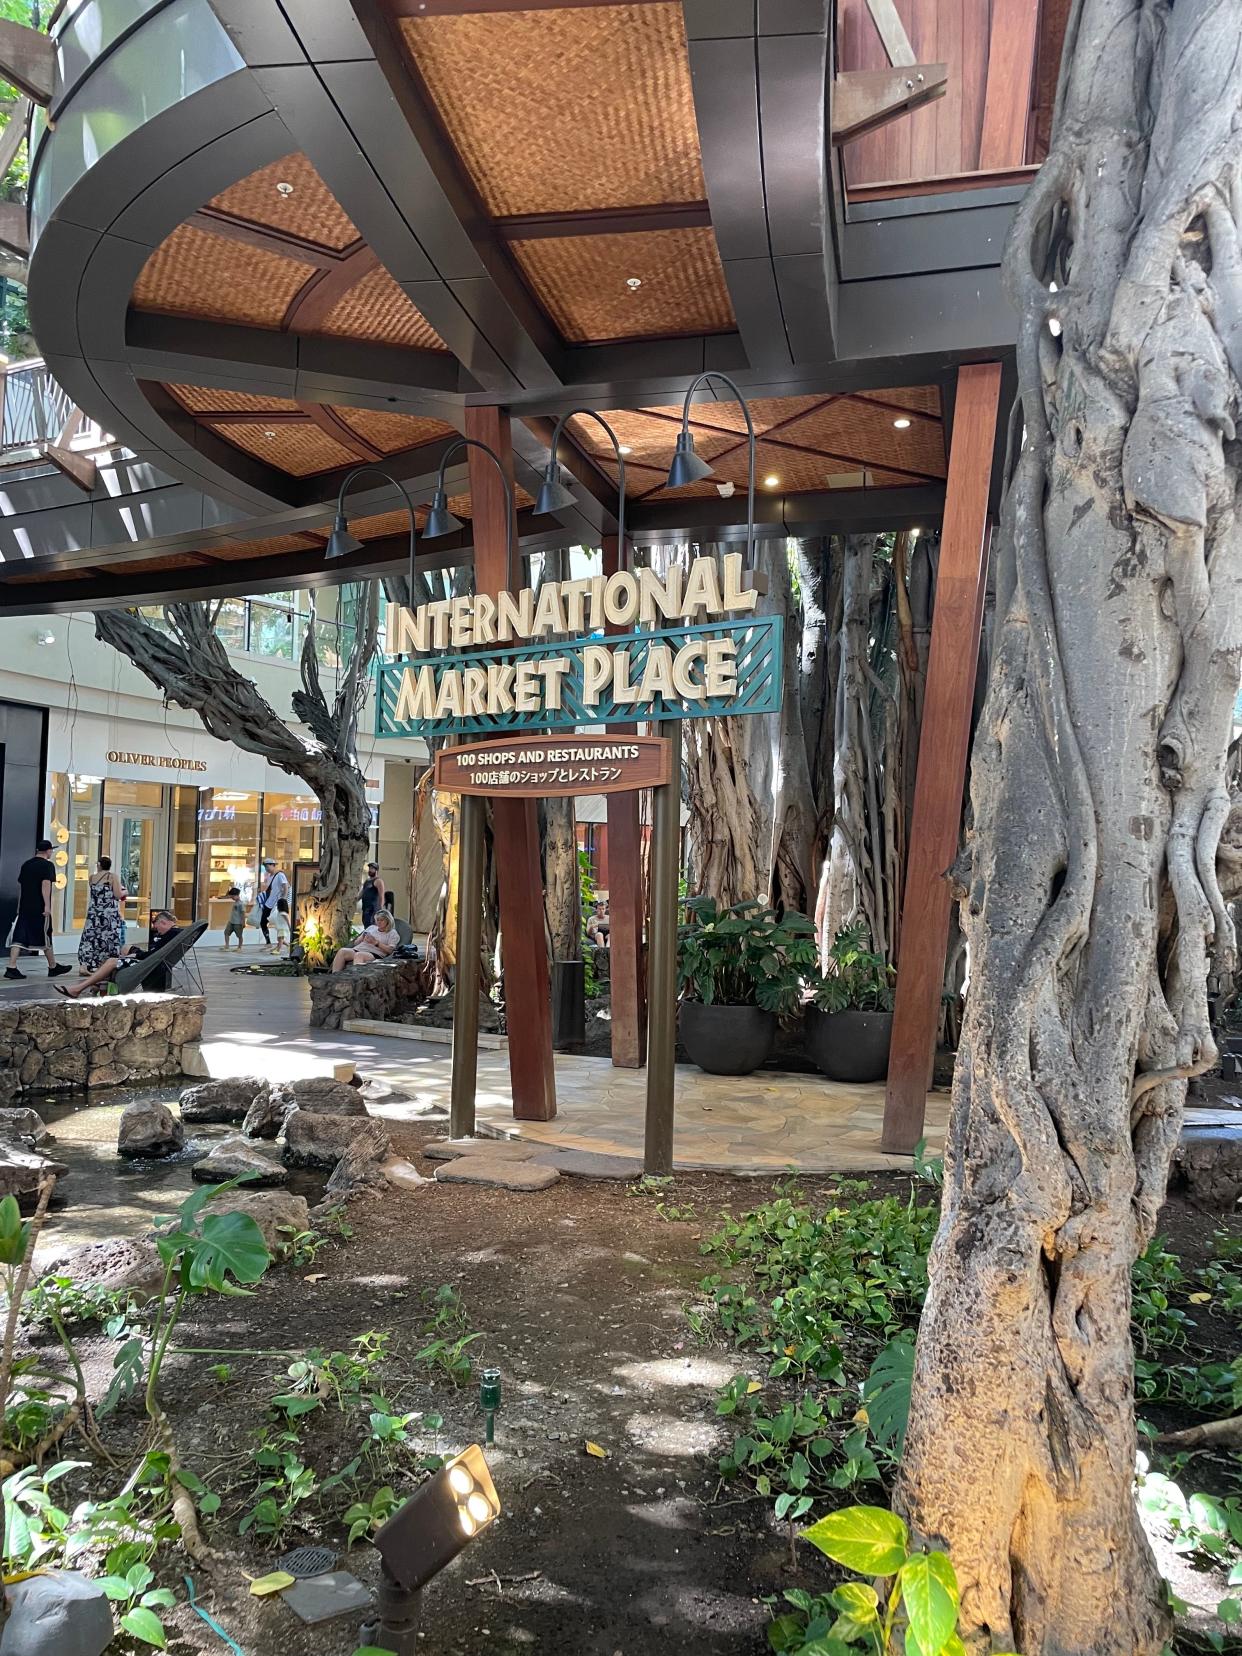 The International Market Place underwent a big renovation into a high-end shopping center from an open-air bazaar, but remains one of Waikiki's biggest attractions.